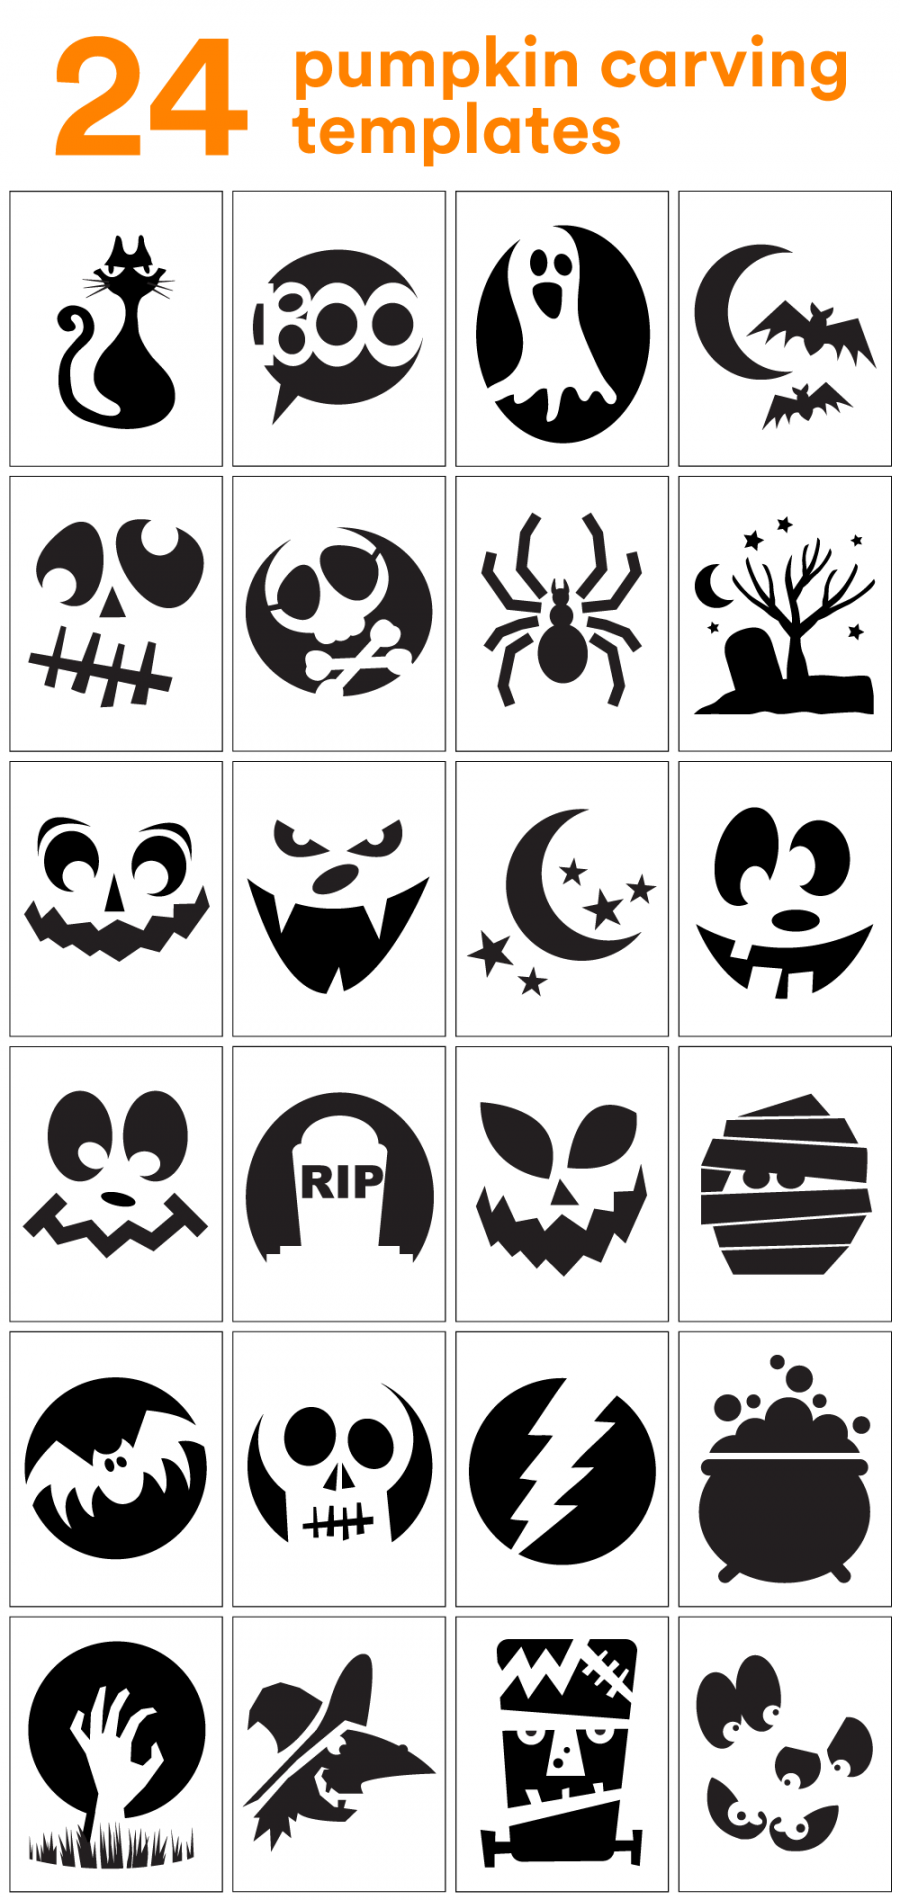 Printable Pumpkin Carving Templates Free - Printable - How to Carve the Coolest Pumpkin on the Block (Carving Stencils